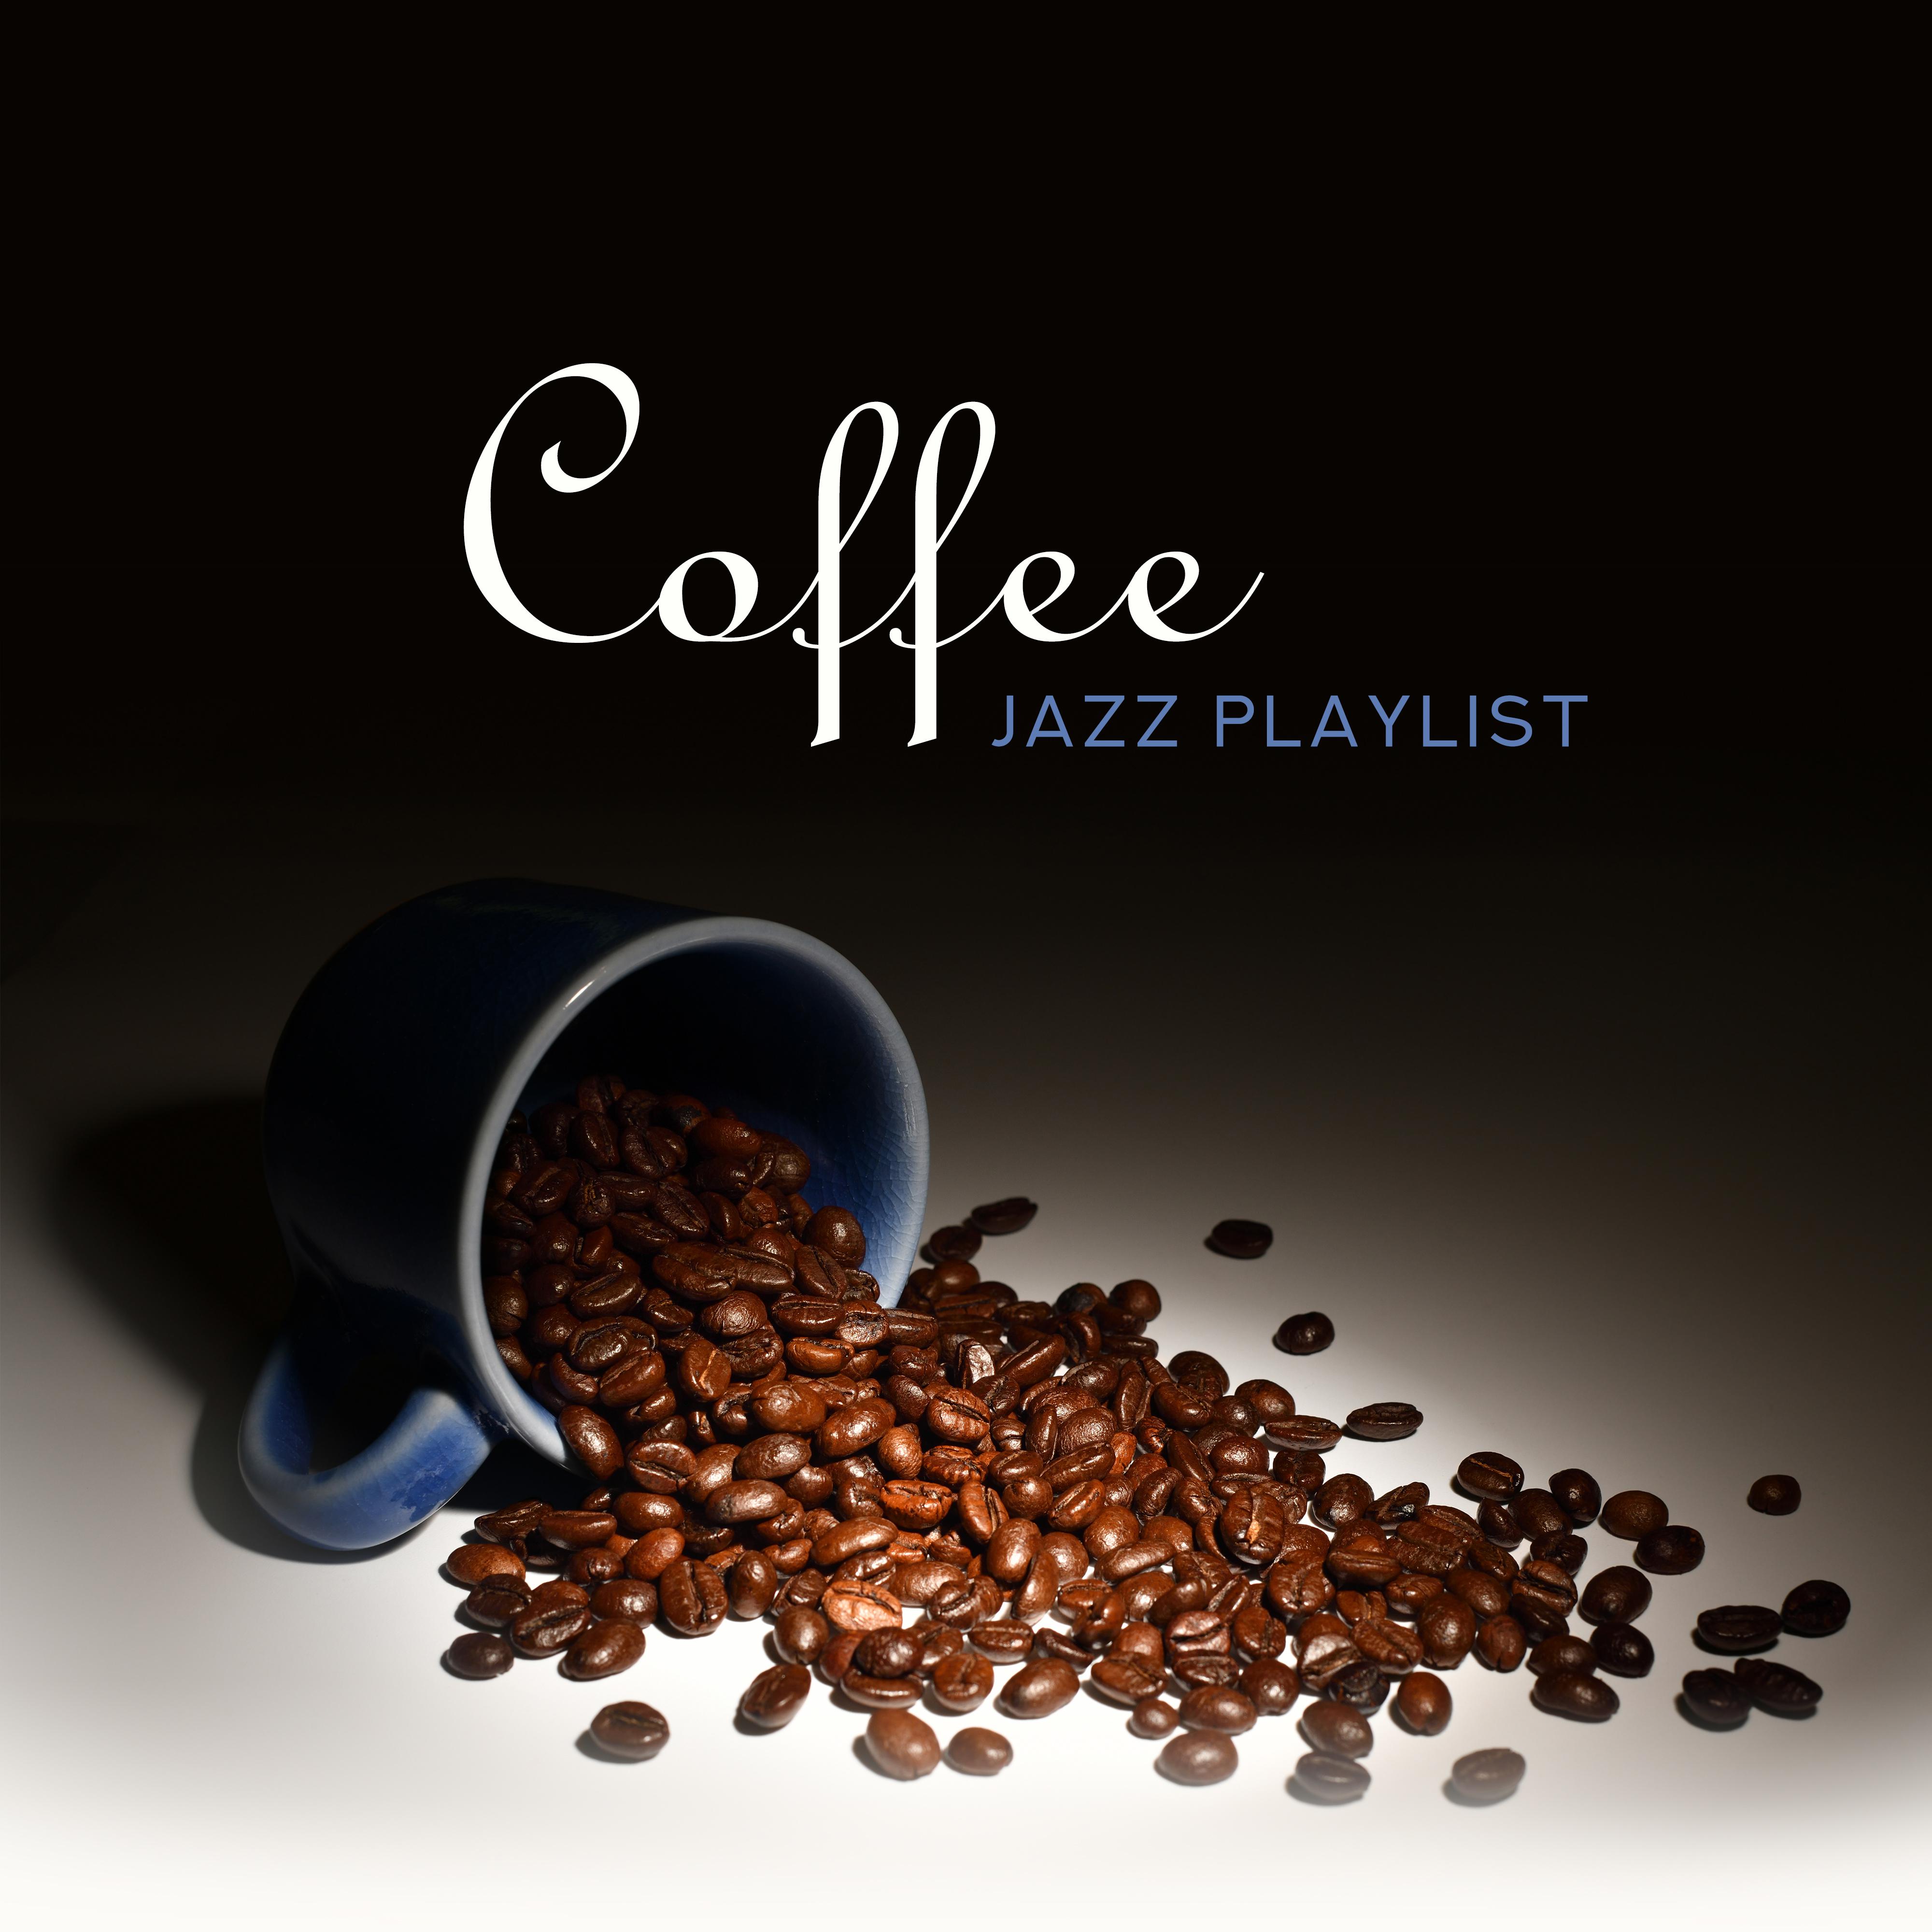 Coffee Jazz Playlist  Pure Jazz for Relaxation  Rest, Coffee Music, Instrumental Songs for Restaurant, Jazz Music Ambient